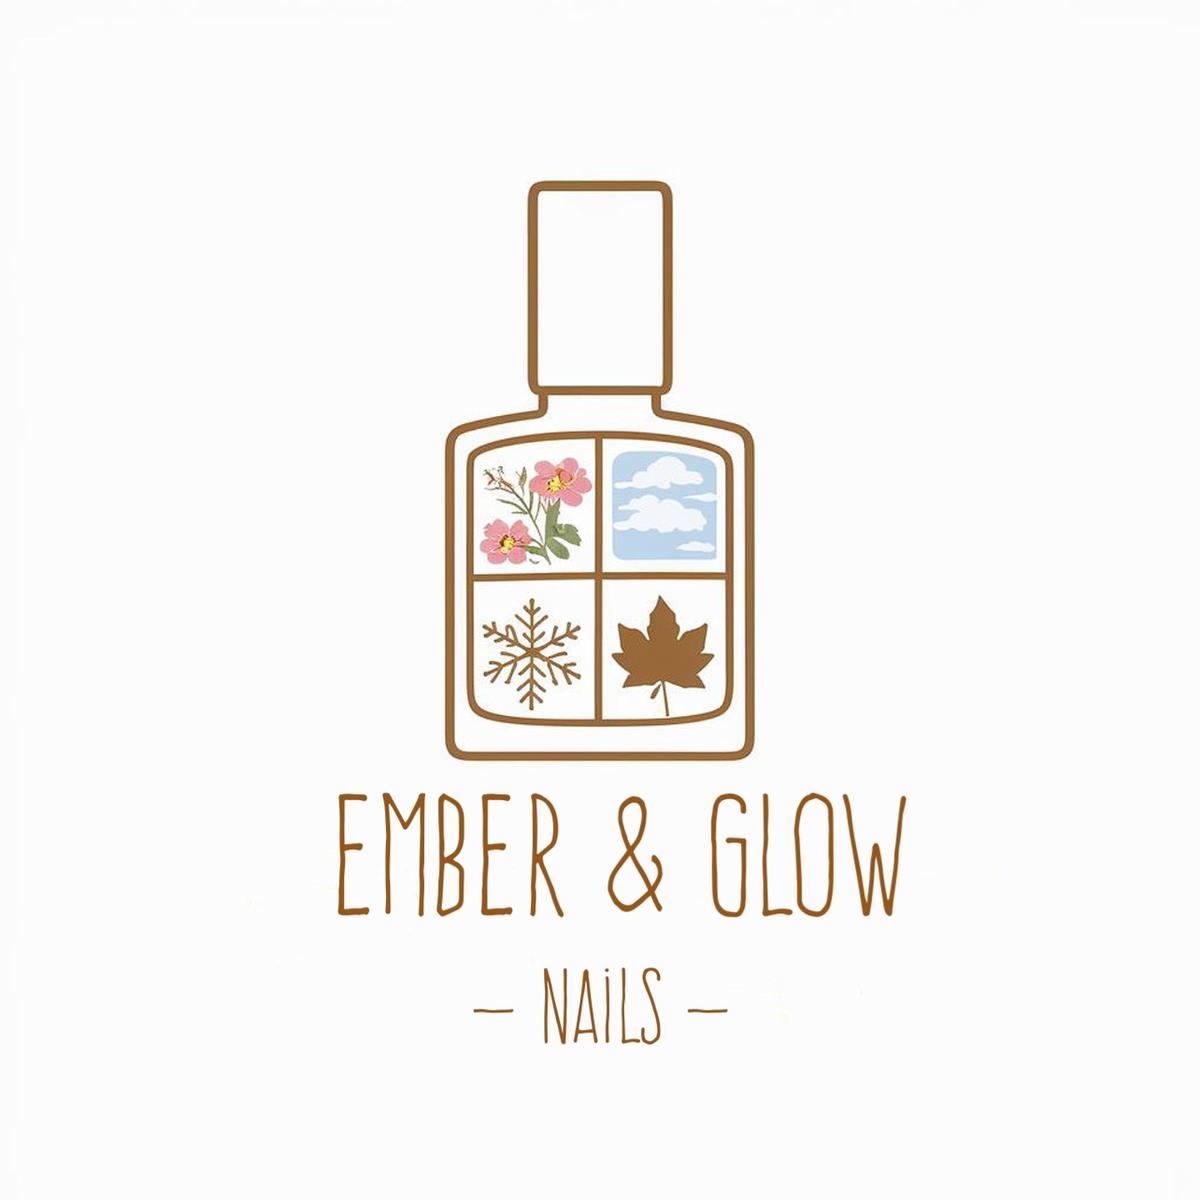 Ember & Glow's images